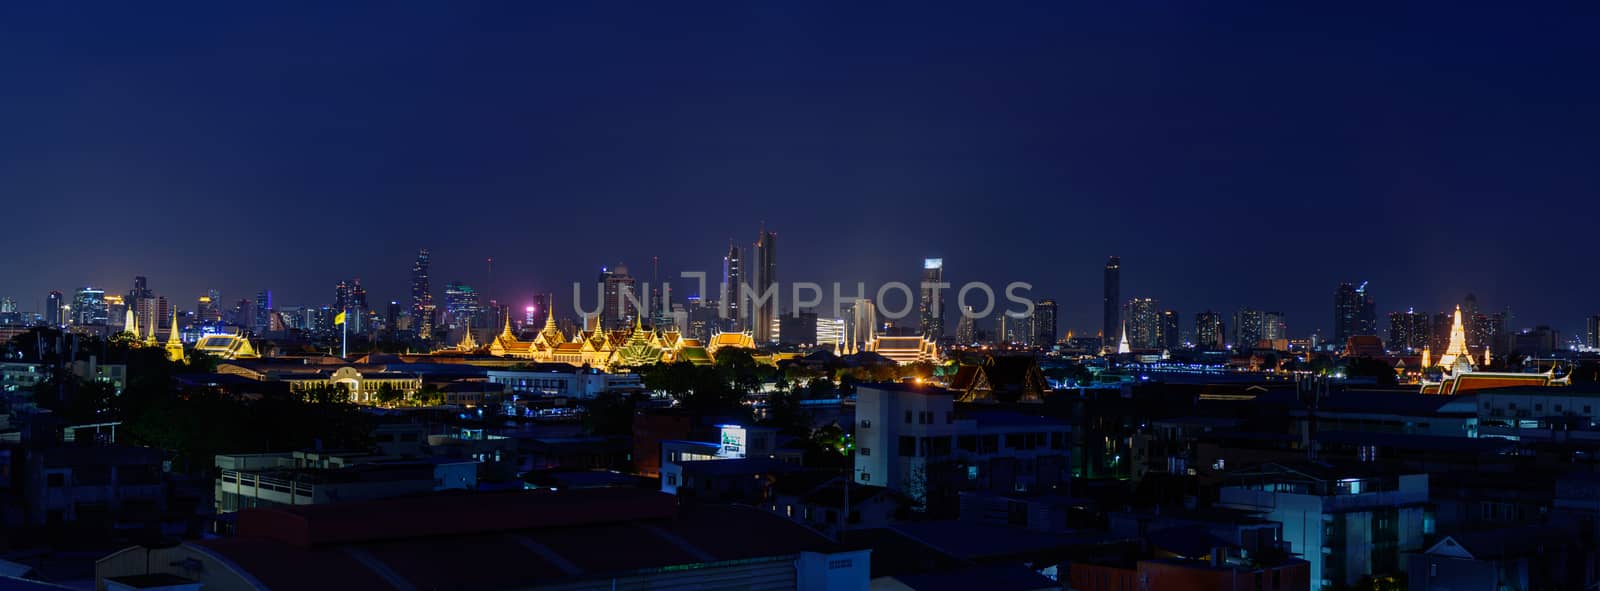 Panorama High view The grand palace of Thailand with high building behind by rukawajung